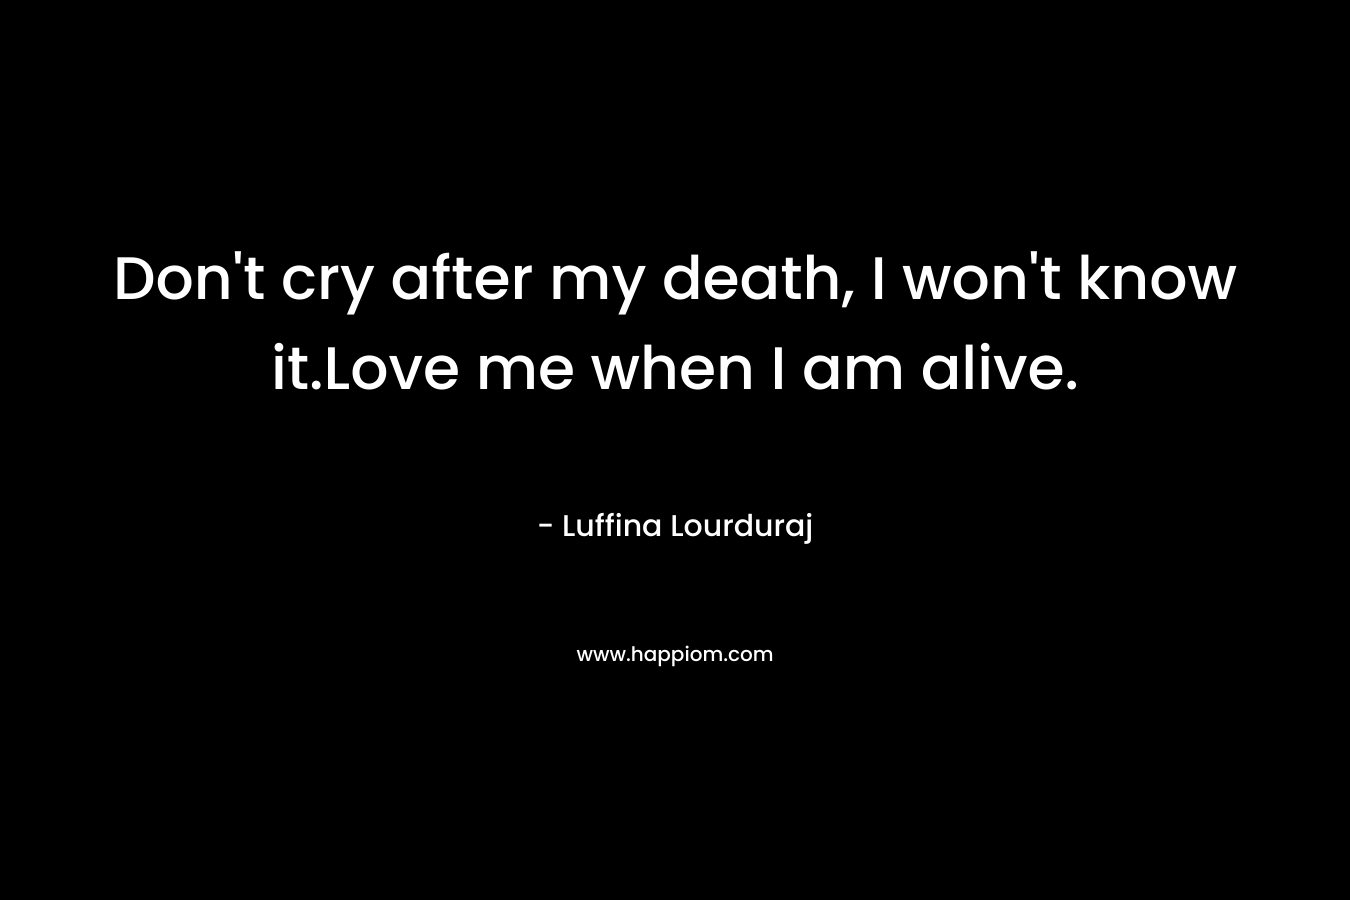 Don't cry after my death, I won't know it.Love me when I am alive.